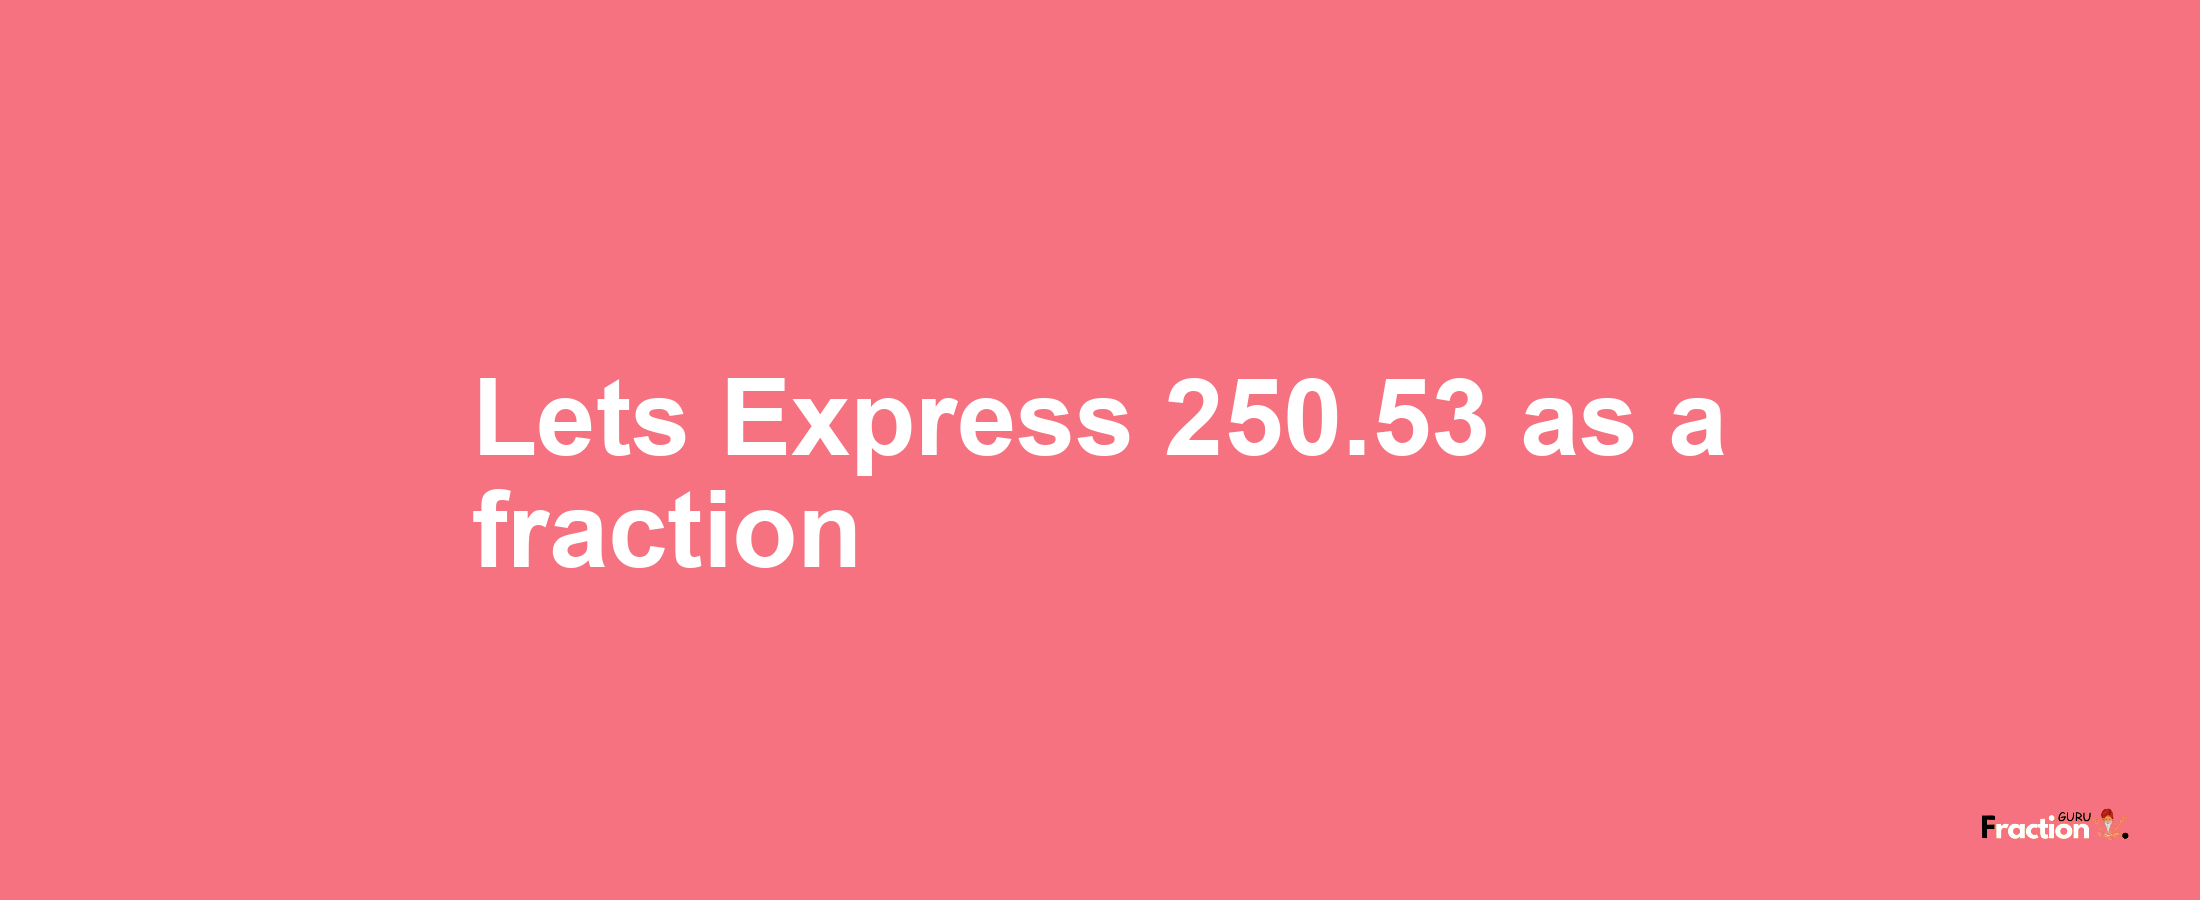 Lets Express 250.53 as afraction